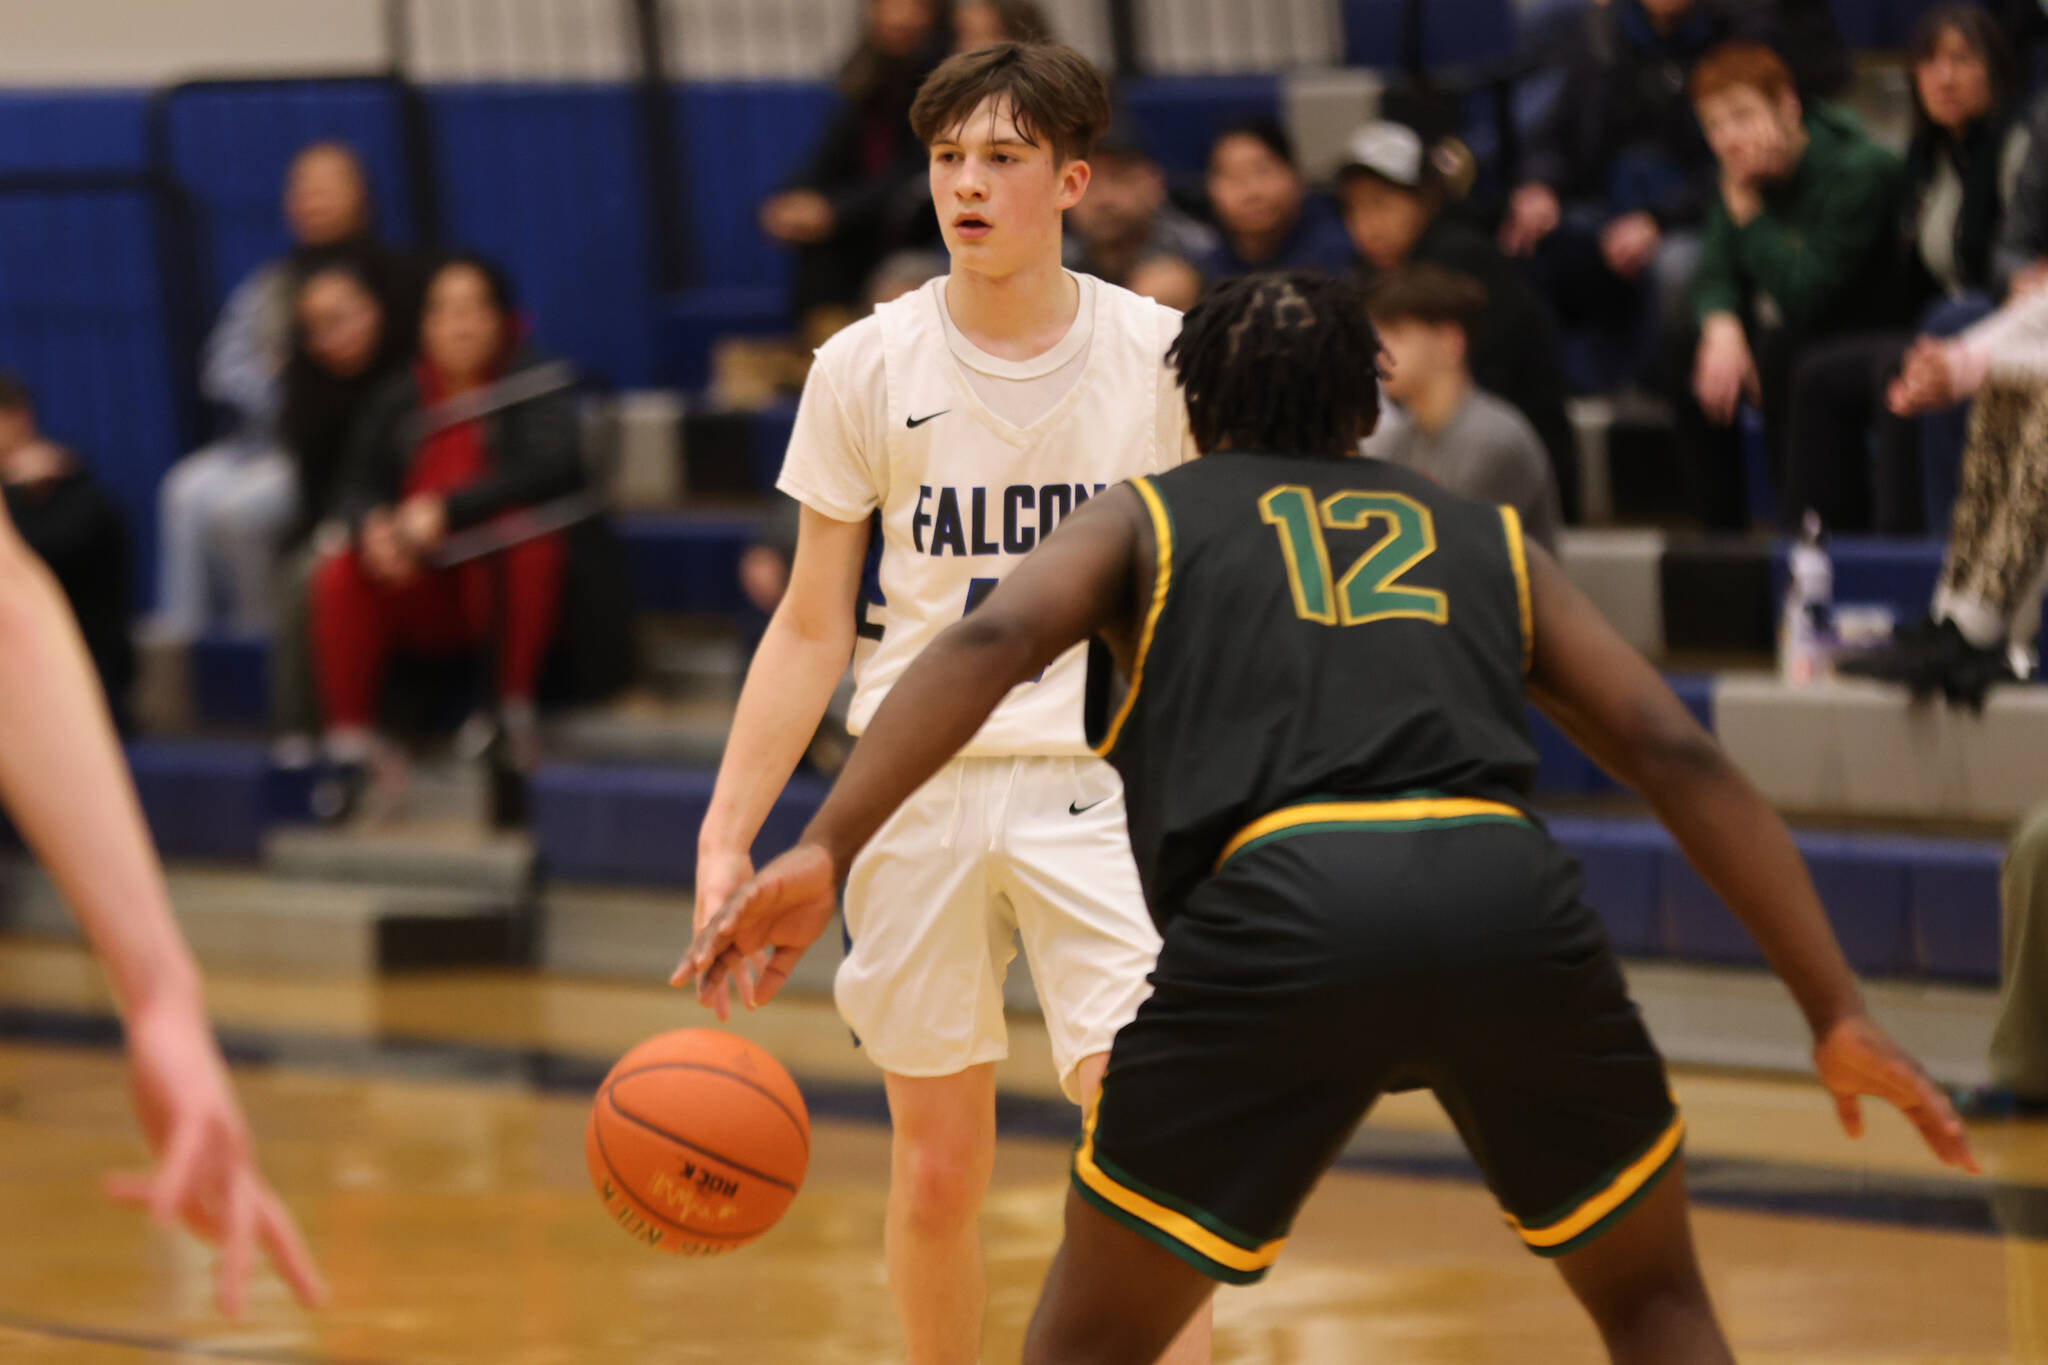 TMHS junior guard Samuel Lockhart surveys the court late in a home game against Service High School. Lockhart put up 14 points for the Falcons, including seven in the fourth quarter. (Ben Hohenstatt / Juneau Empire)